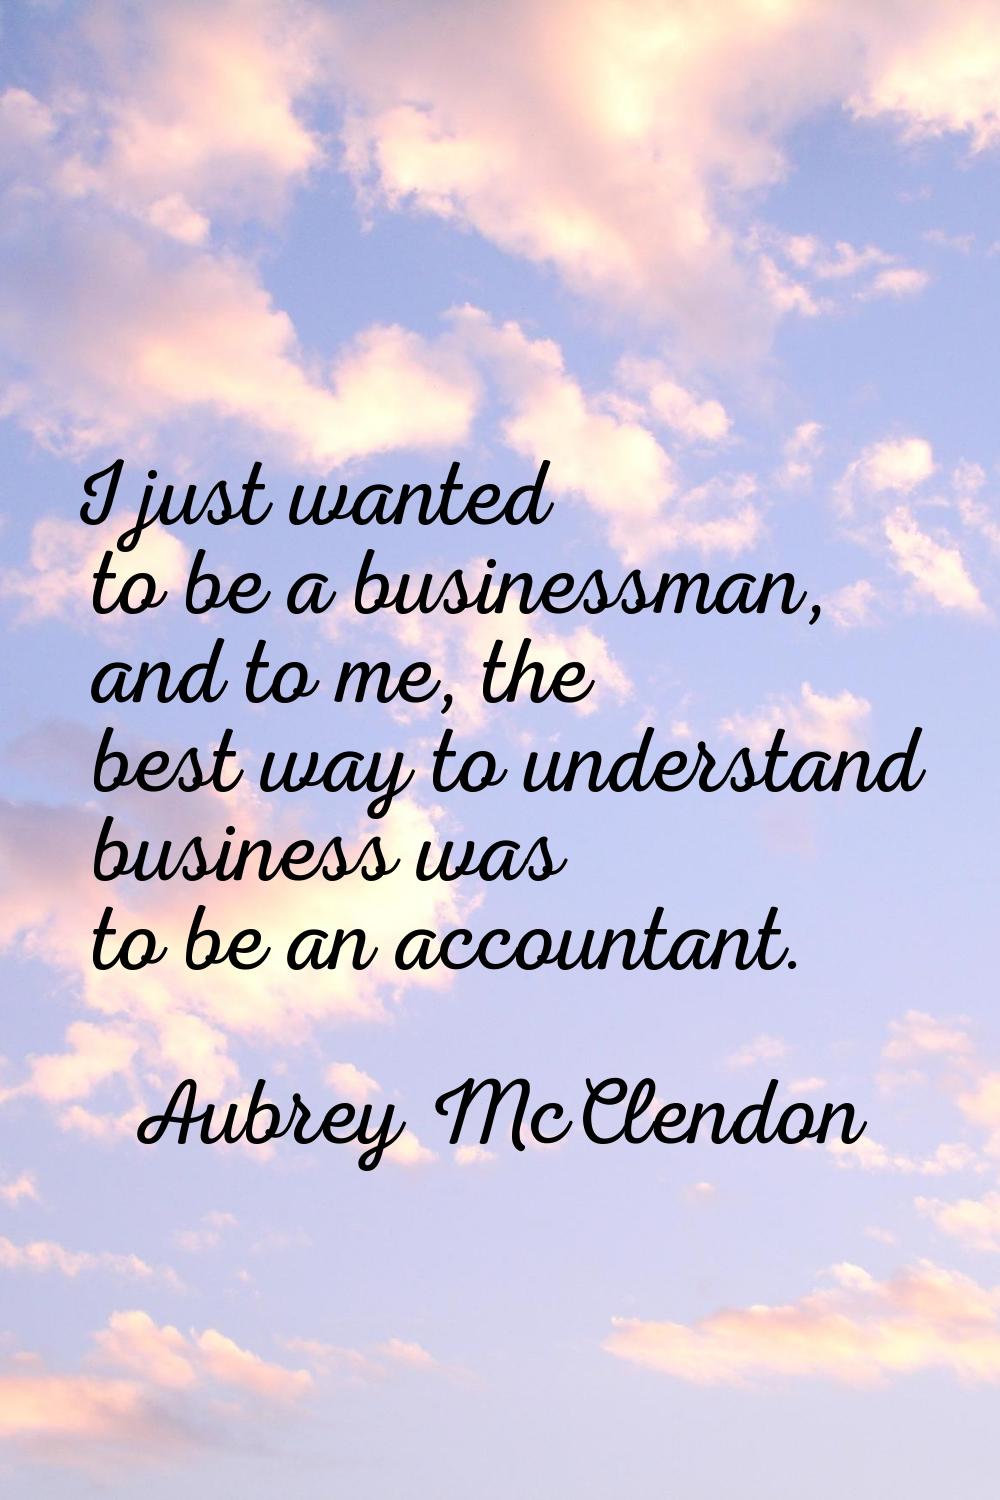 I just wanted to be a businessman, and to me, the best way to understand business was to be an acco